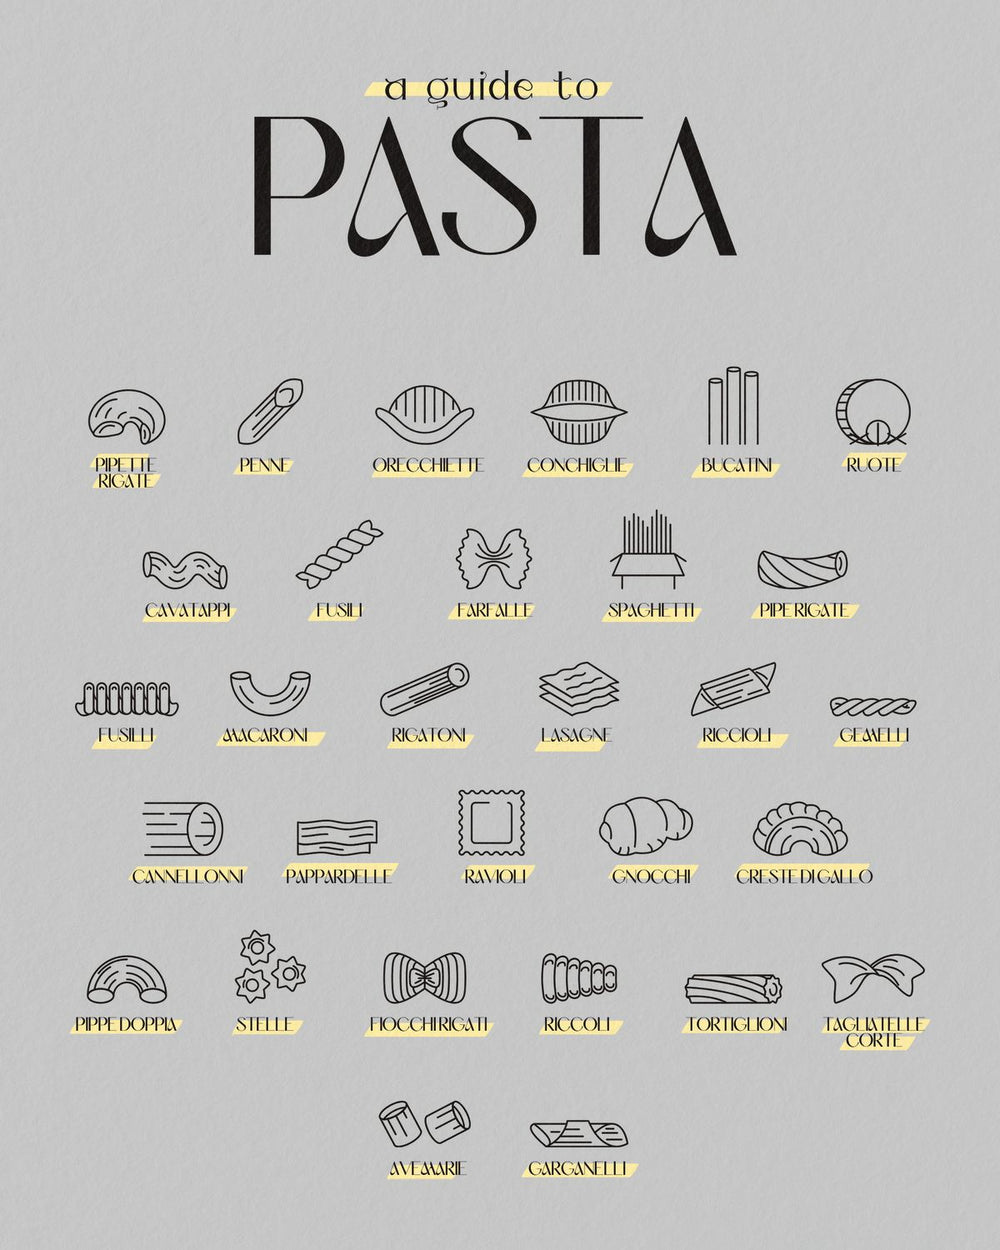 Pasta Guide Chart